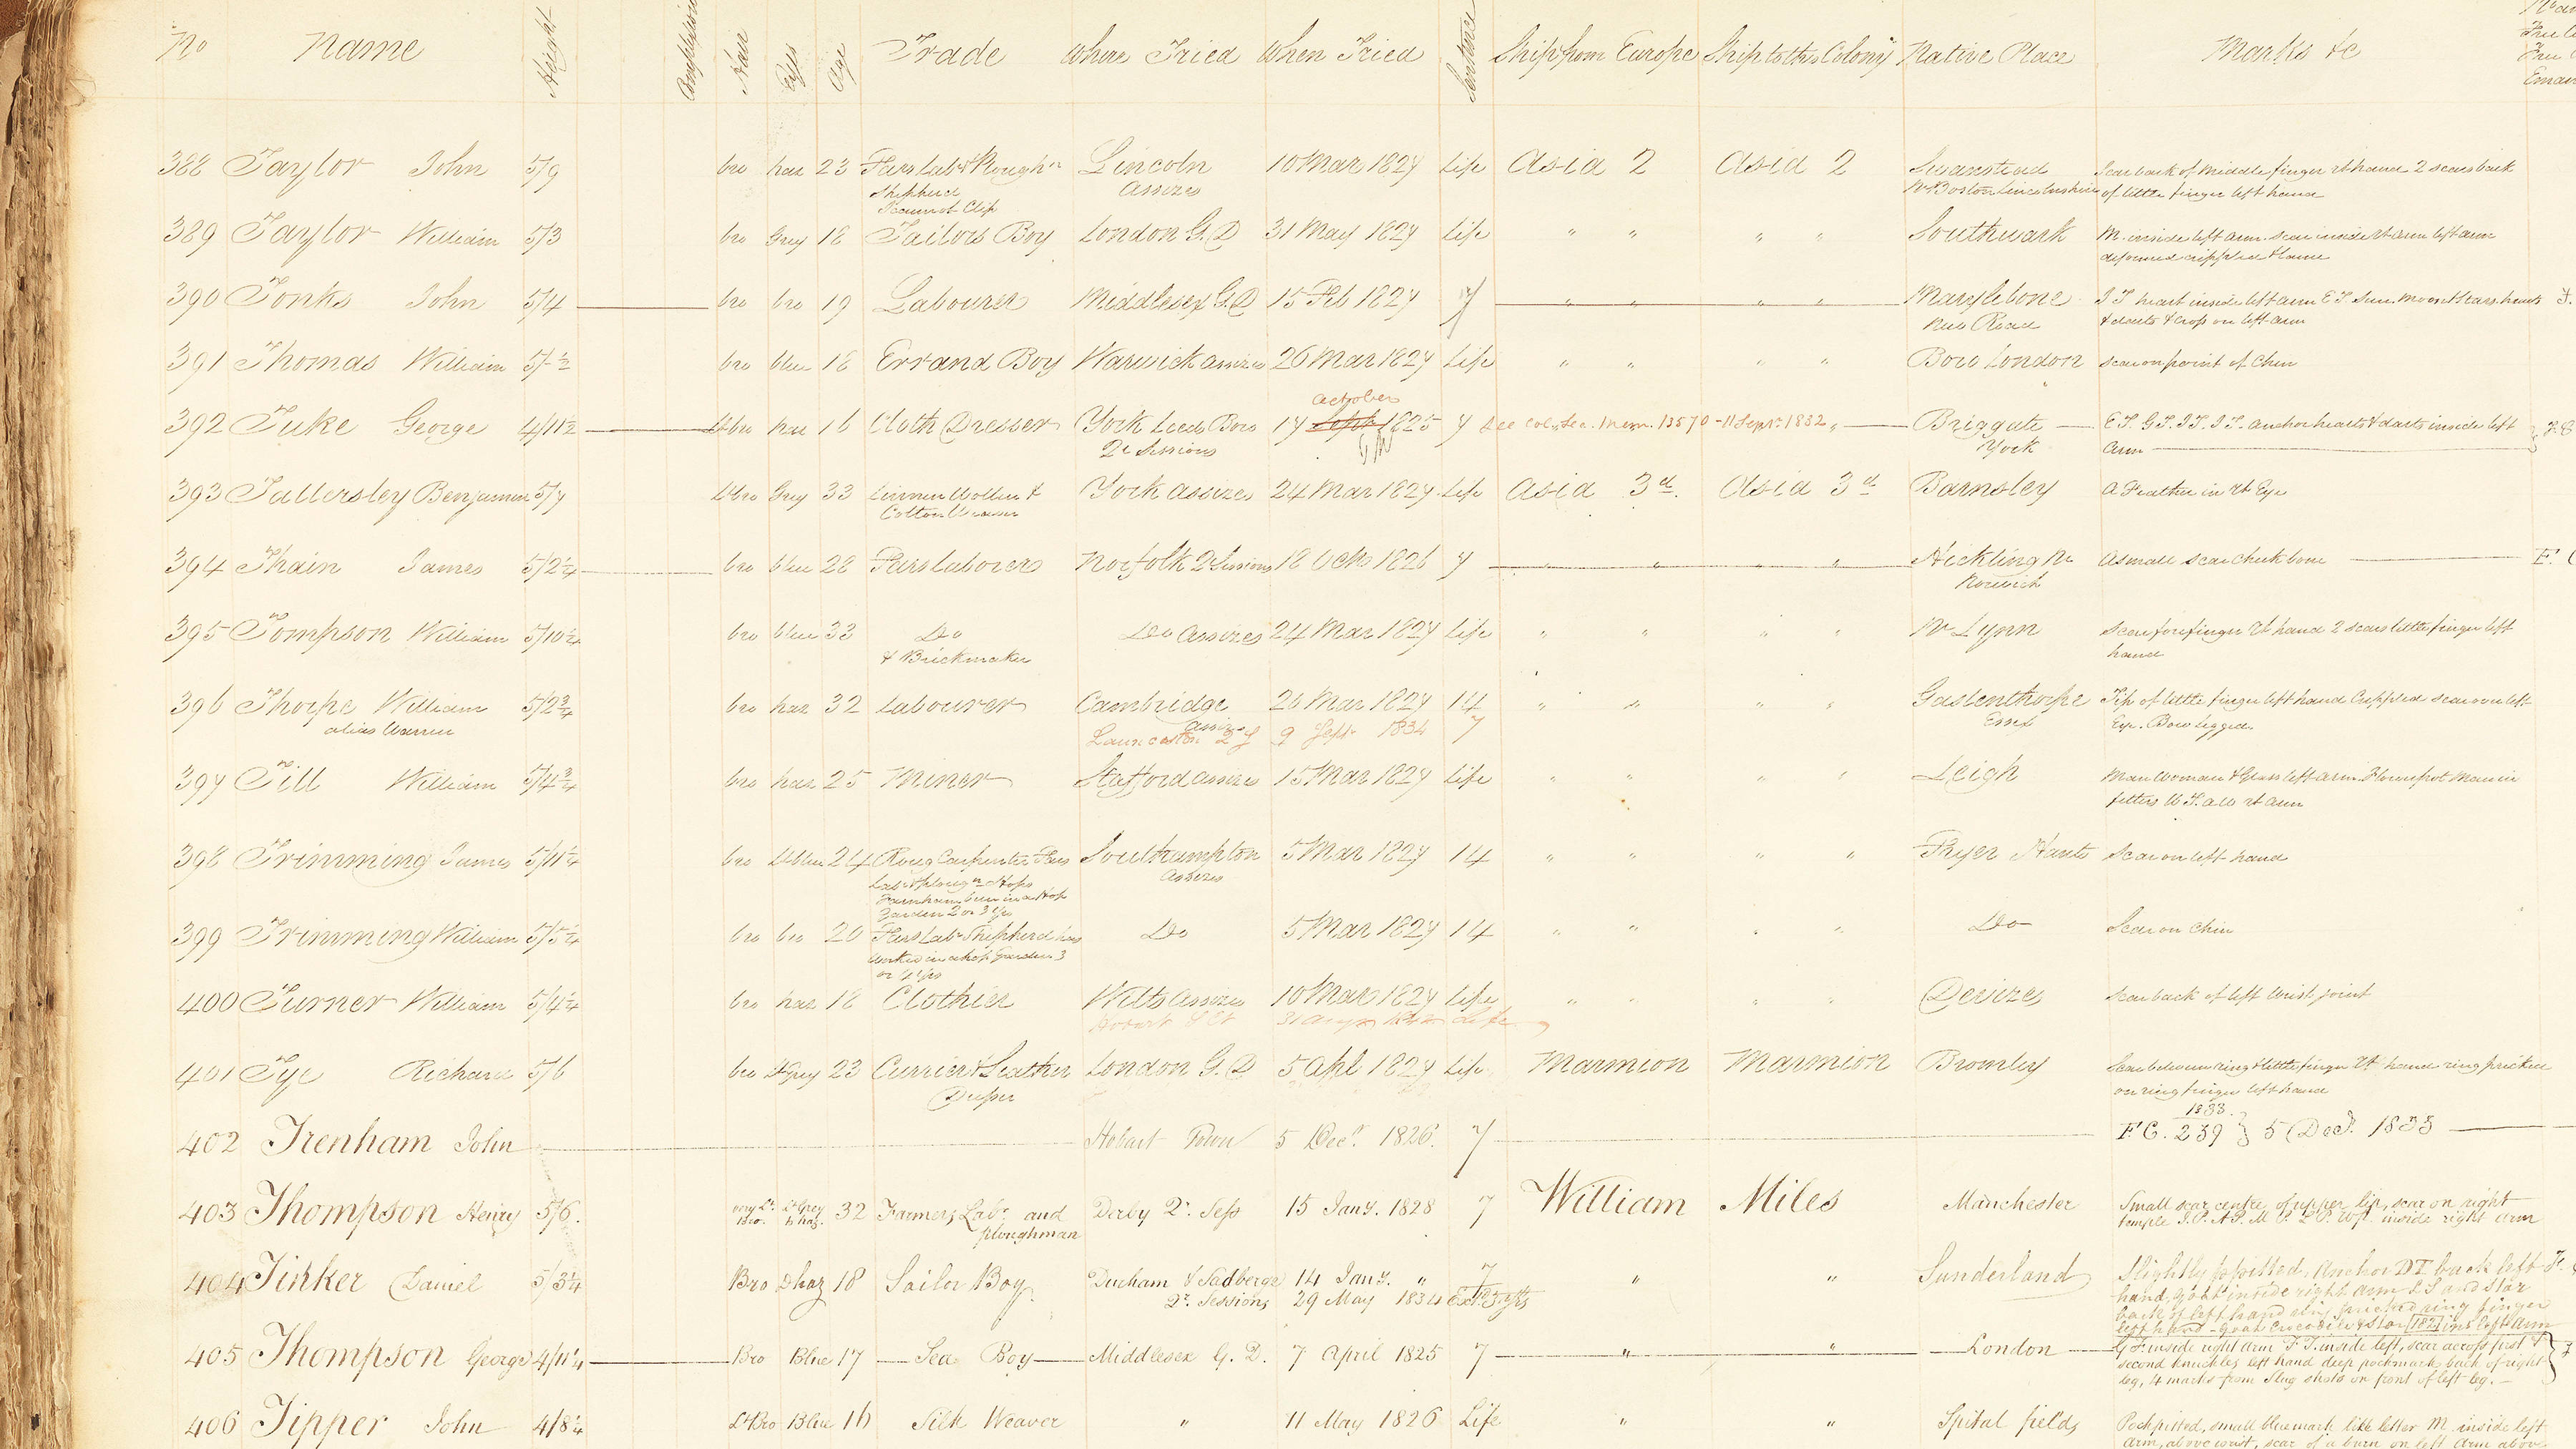 Excerpt from ledgers held as part of Brickendon Estate’s archives mentioning William Thorpe.